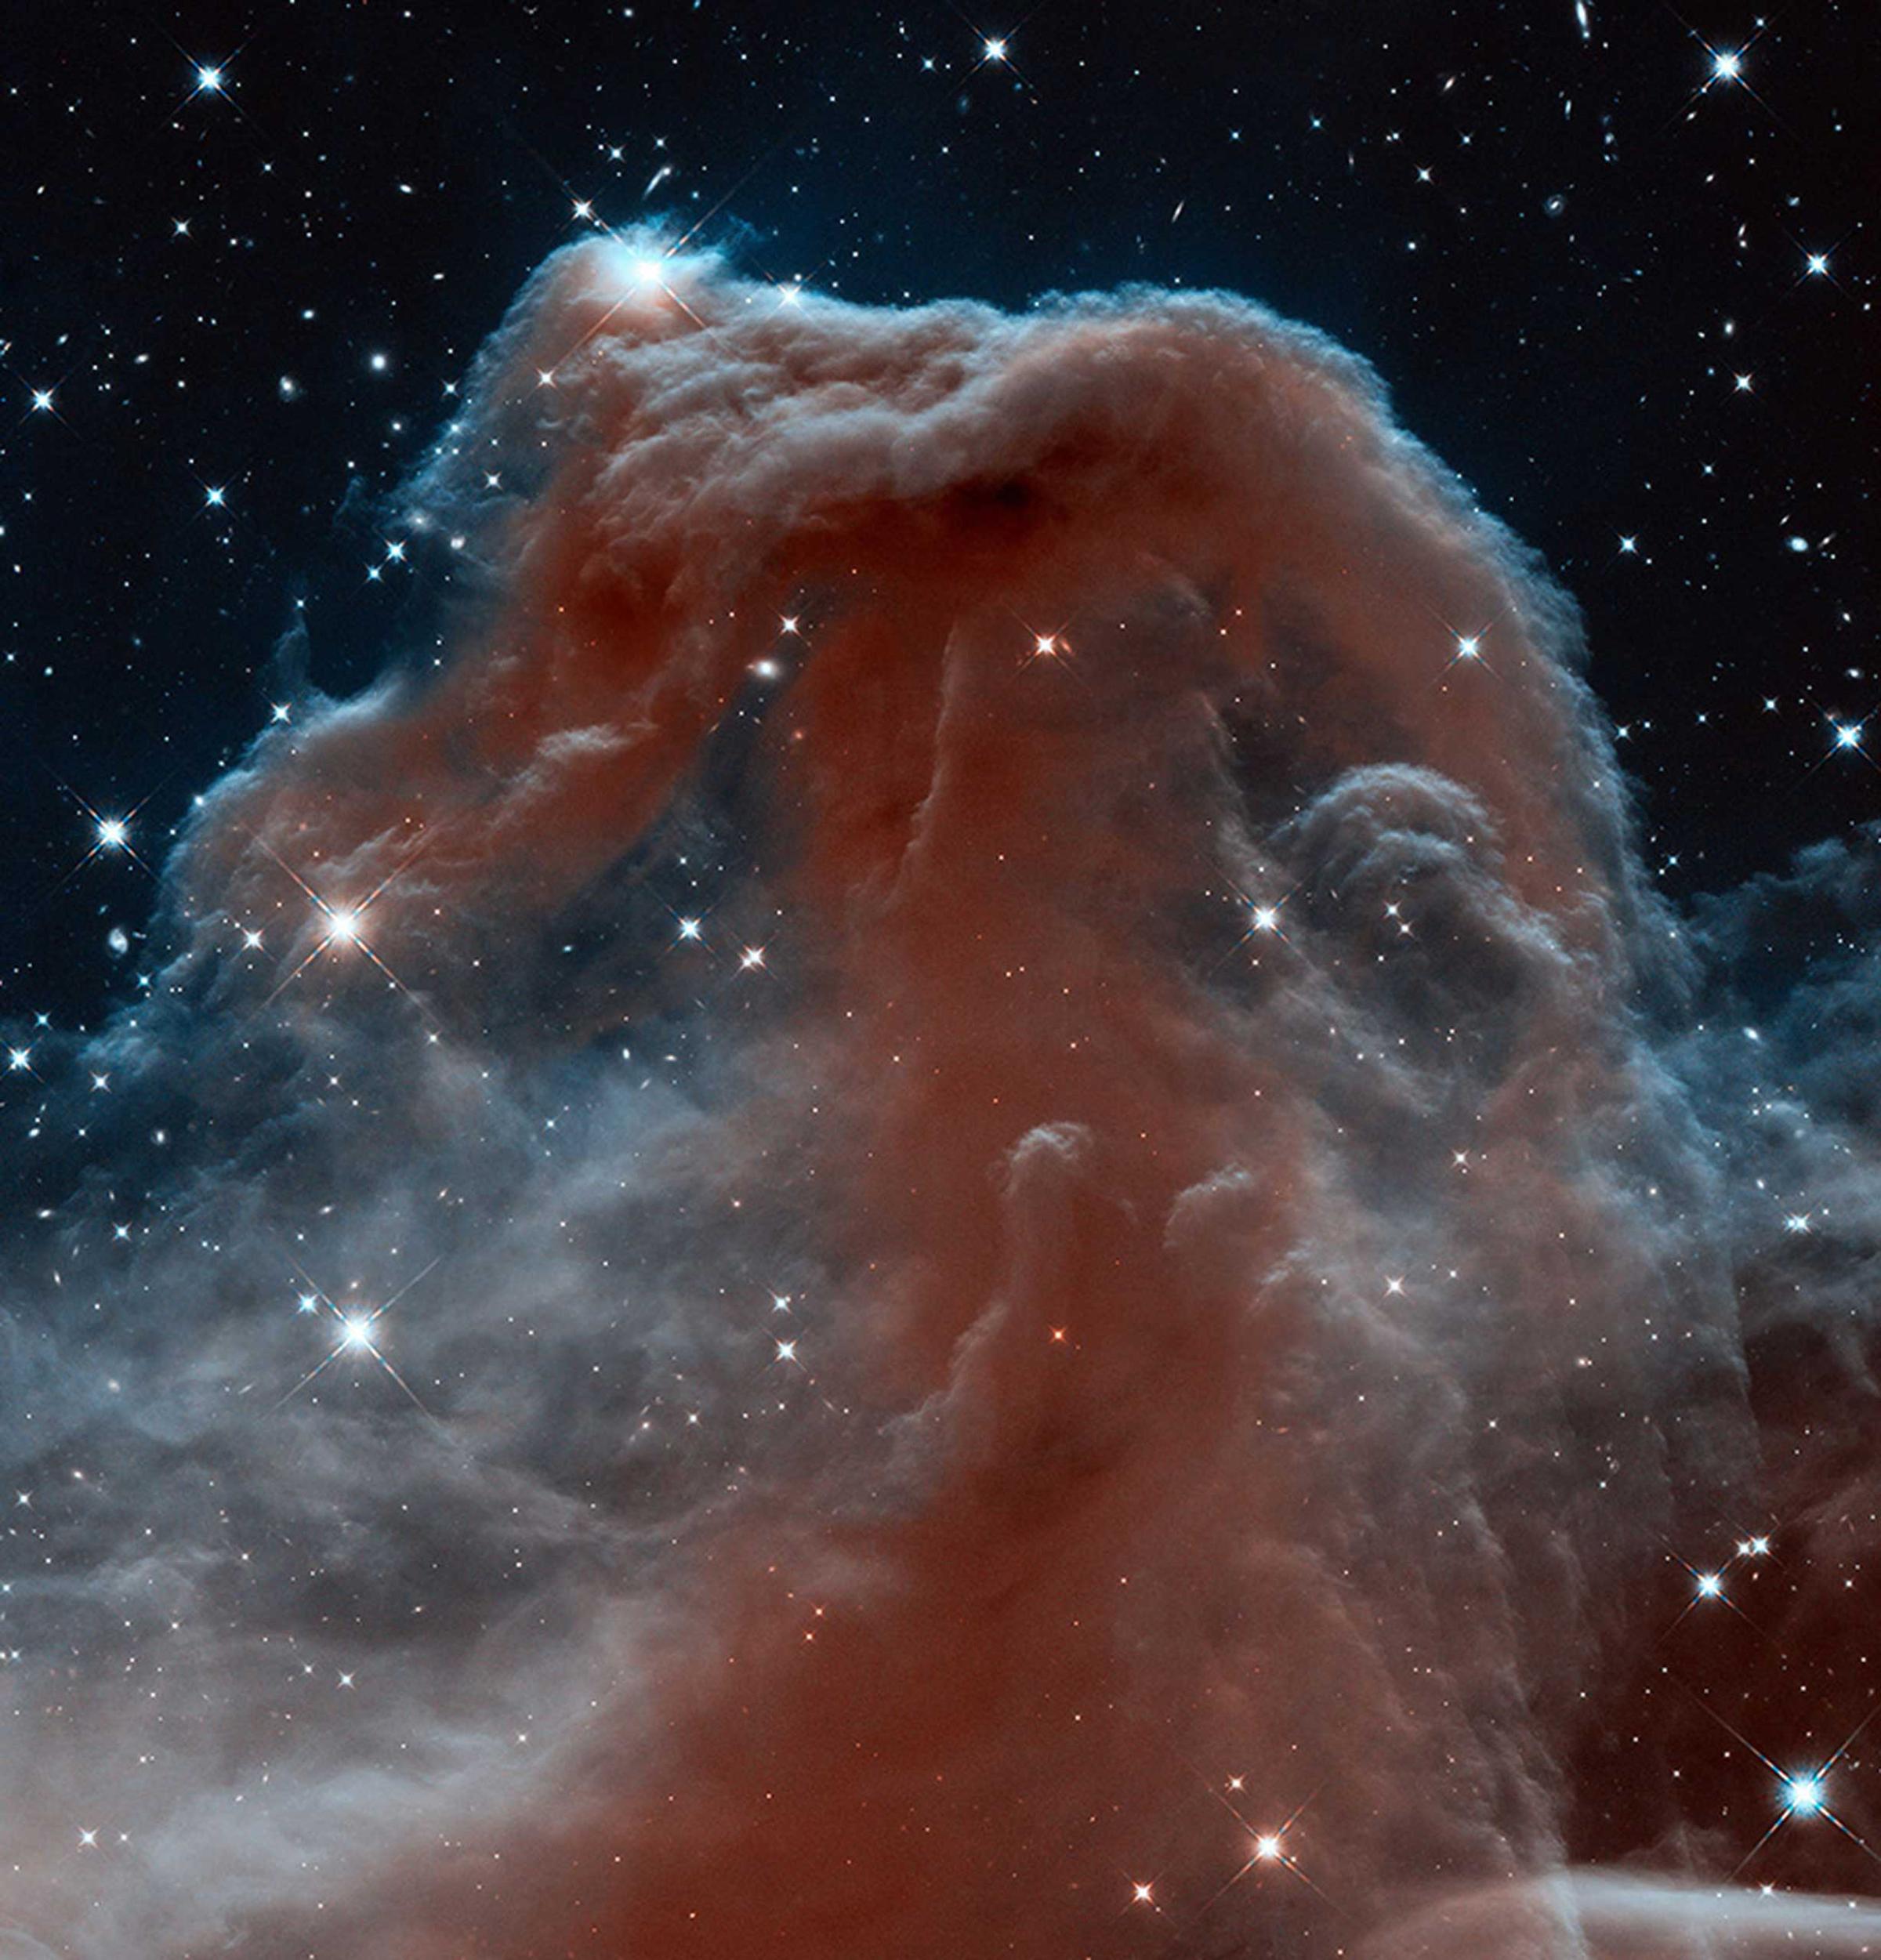 A new view of the famous Horsehead Nebula taken by the Hubble Space Telescope in infrared wavelengths. The nebula, shadowy in optical light, appears transparent and ethereal when seen in the infrared, represented here with visible shades.